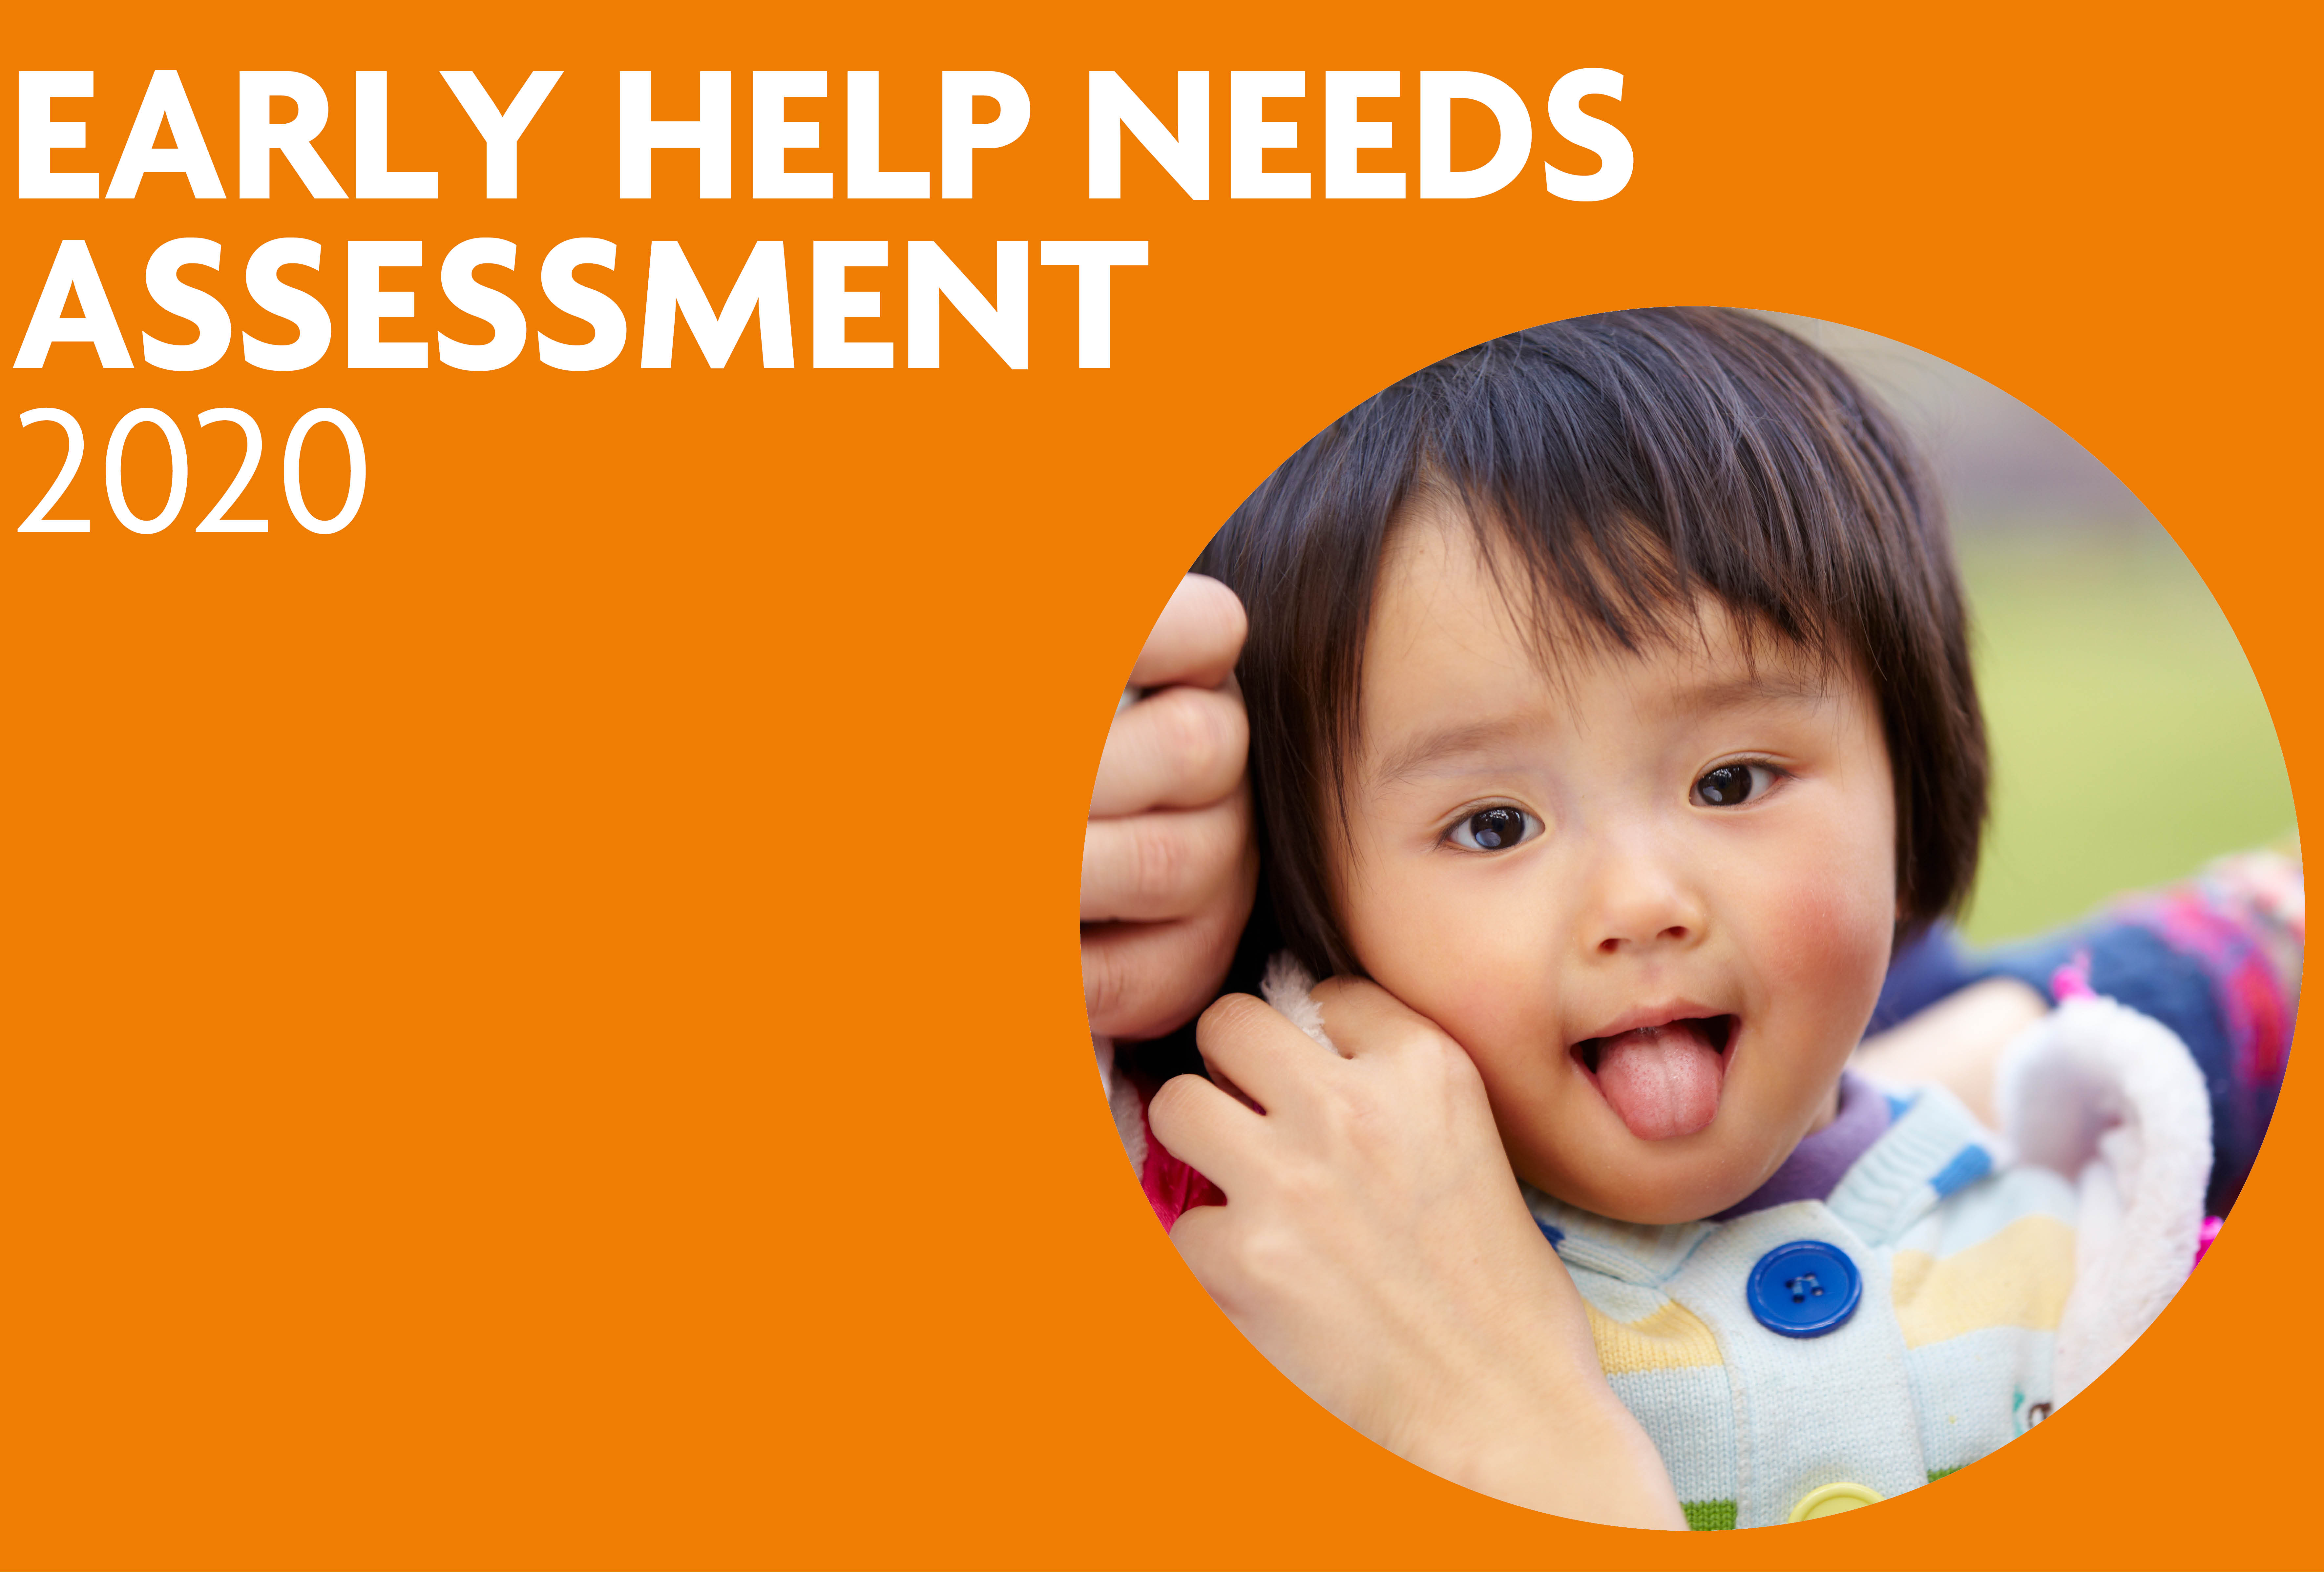 Early help needs assessment